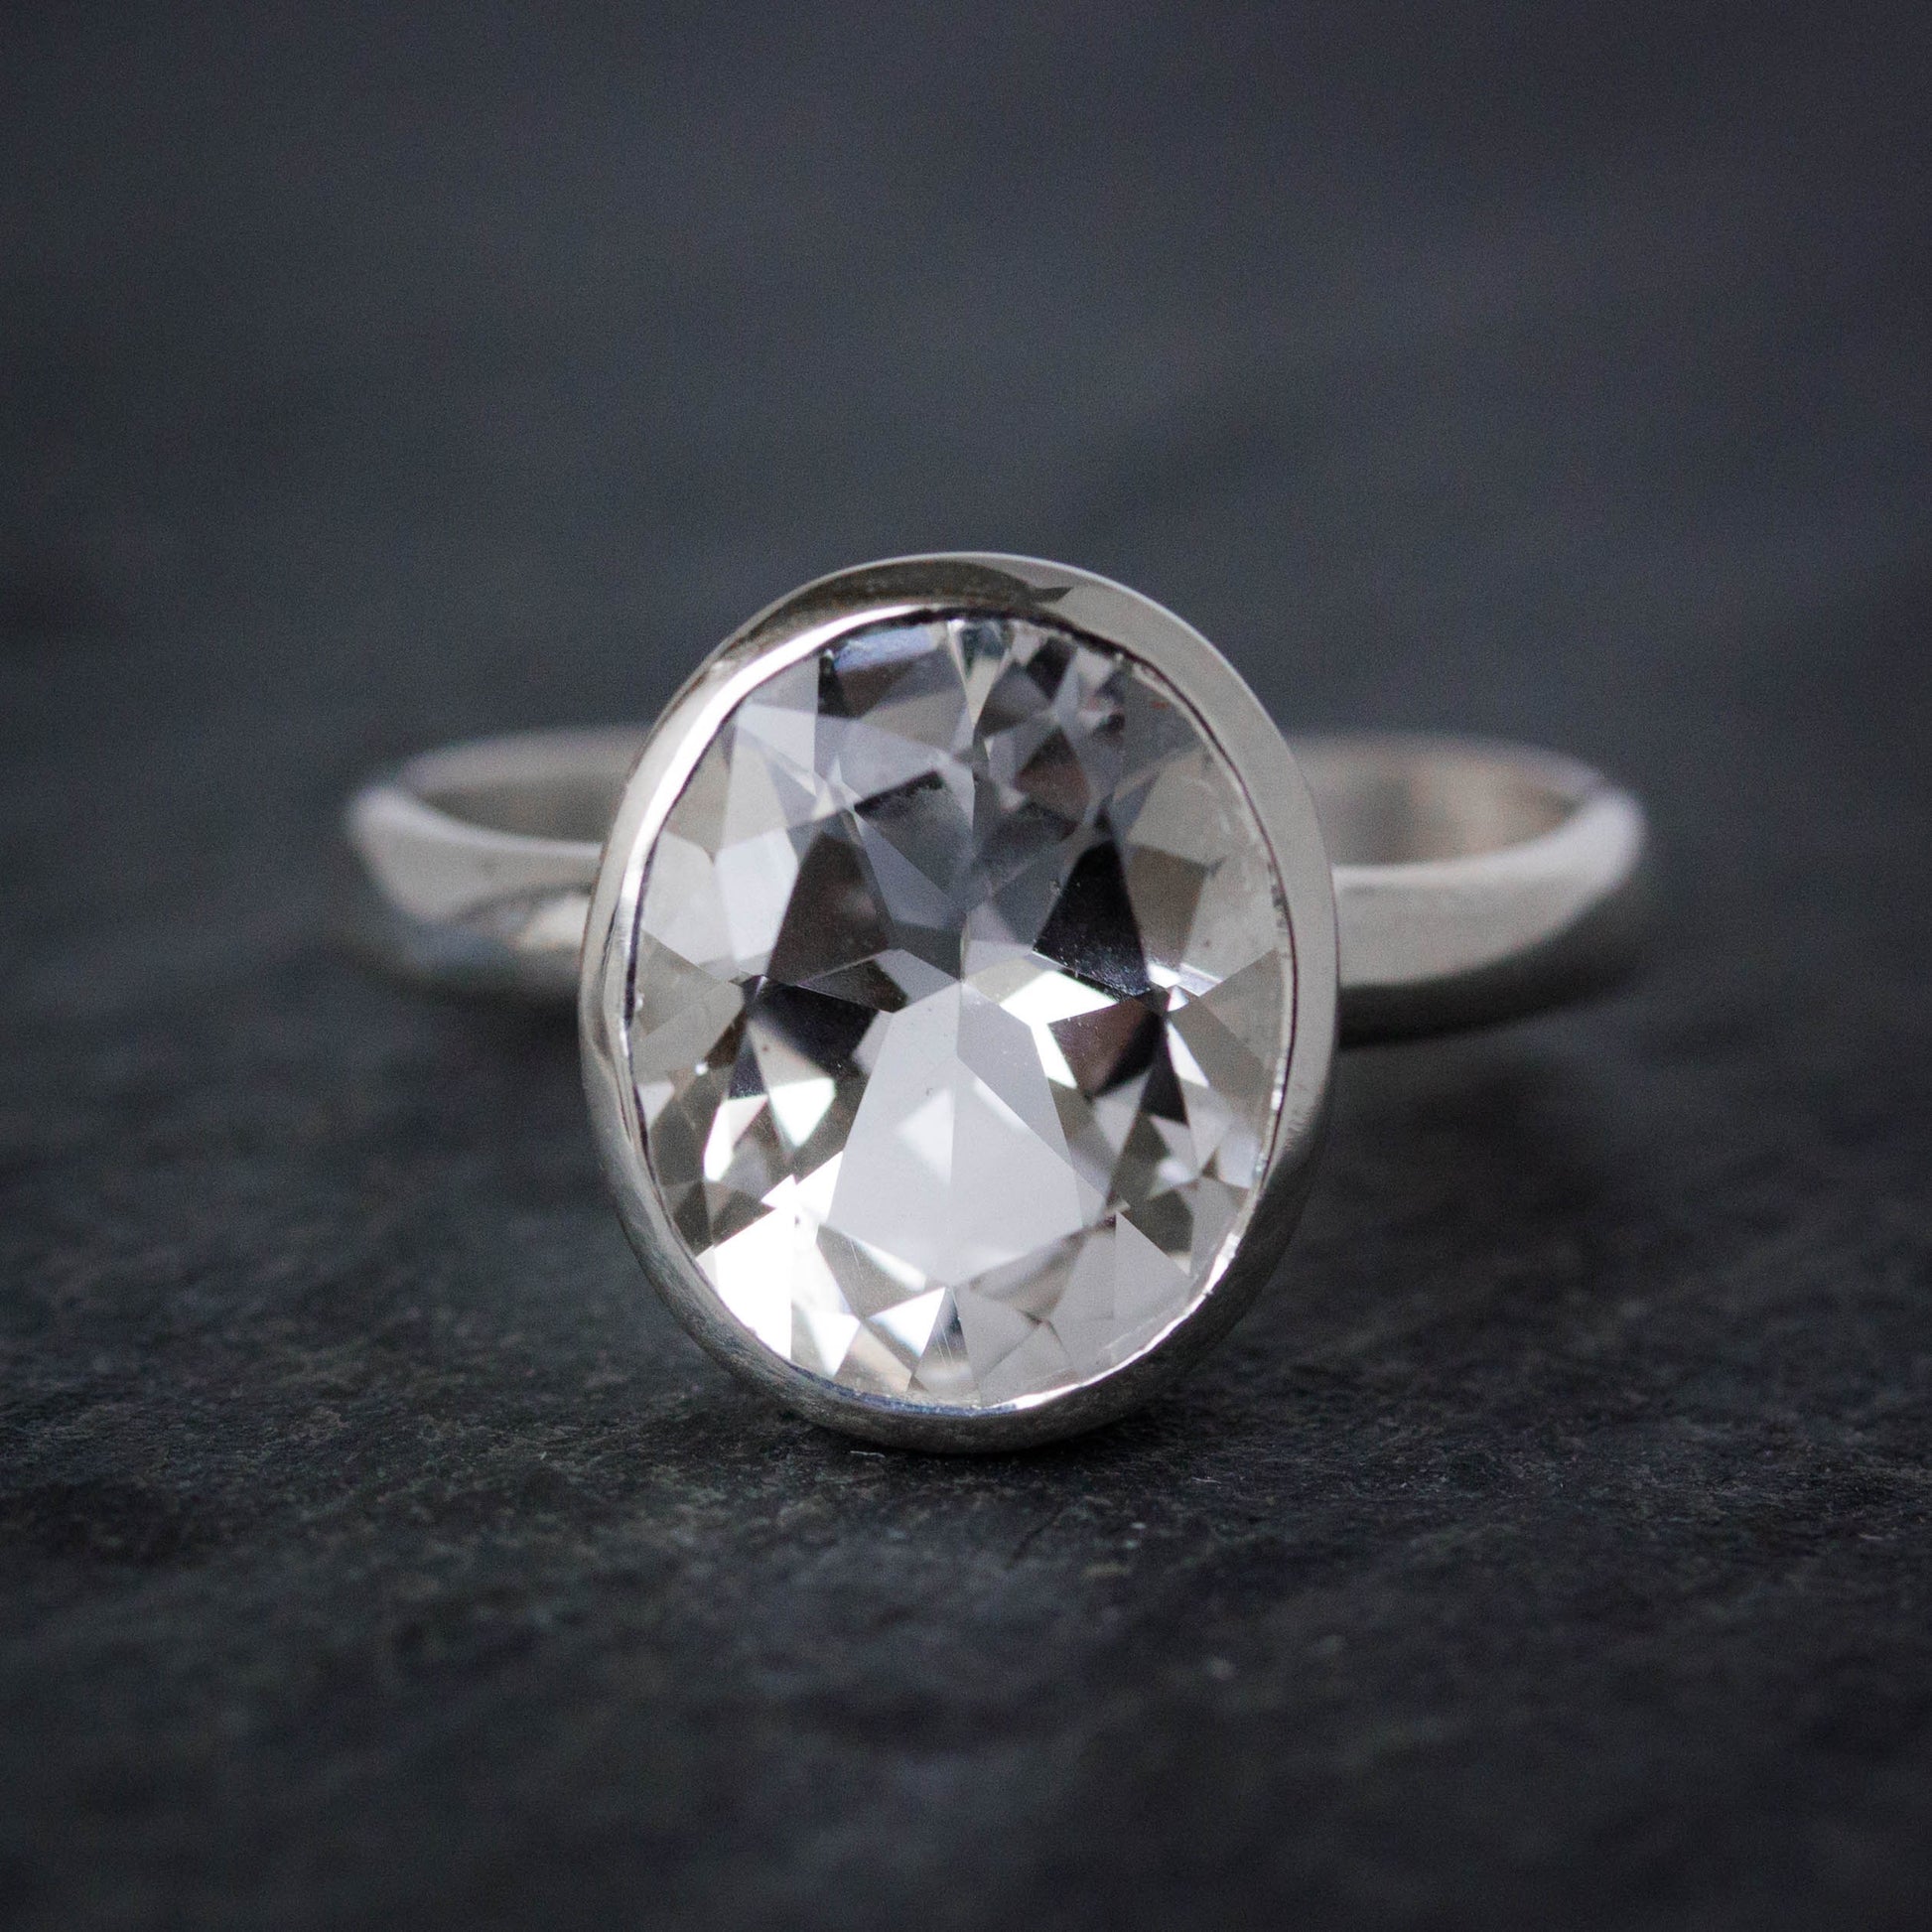 An Oval Size 6.5 Handcrafted White Topaz Ring on a black surface.